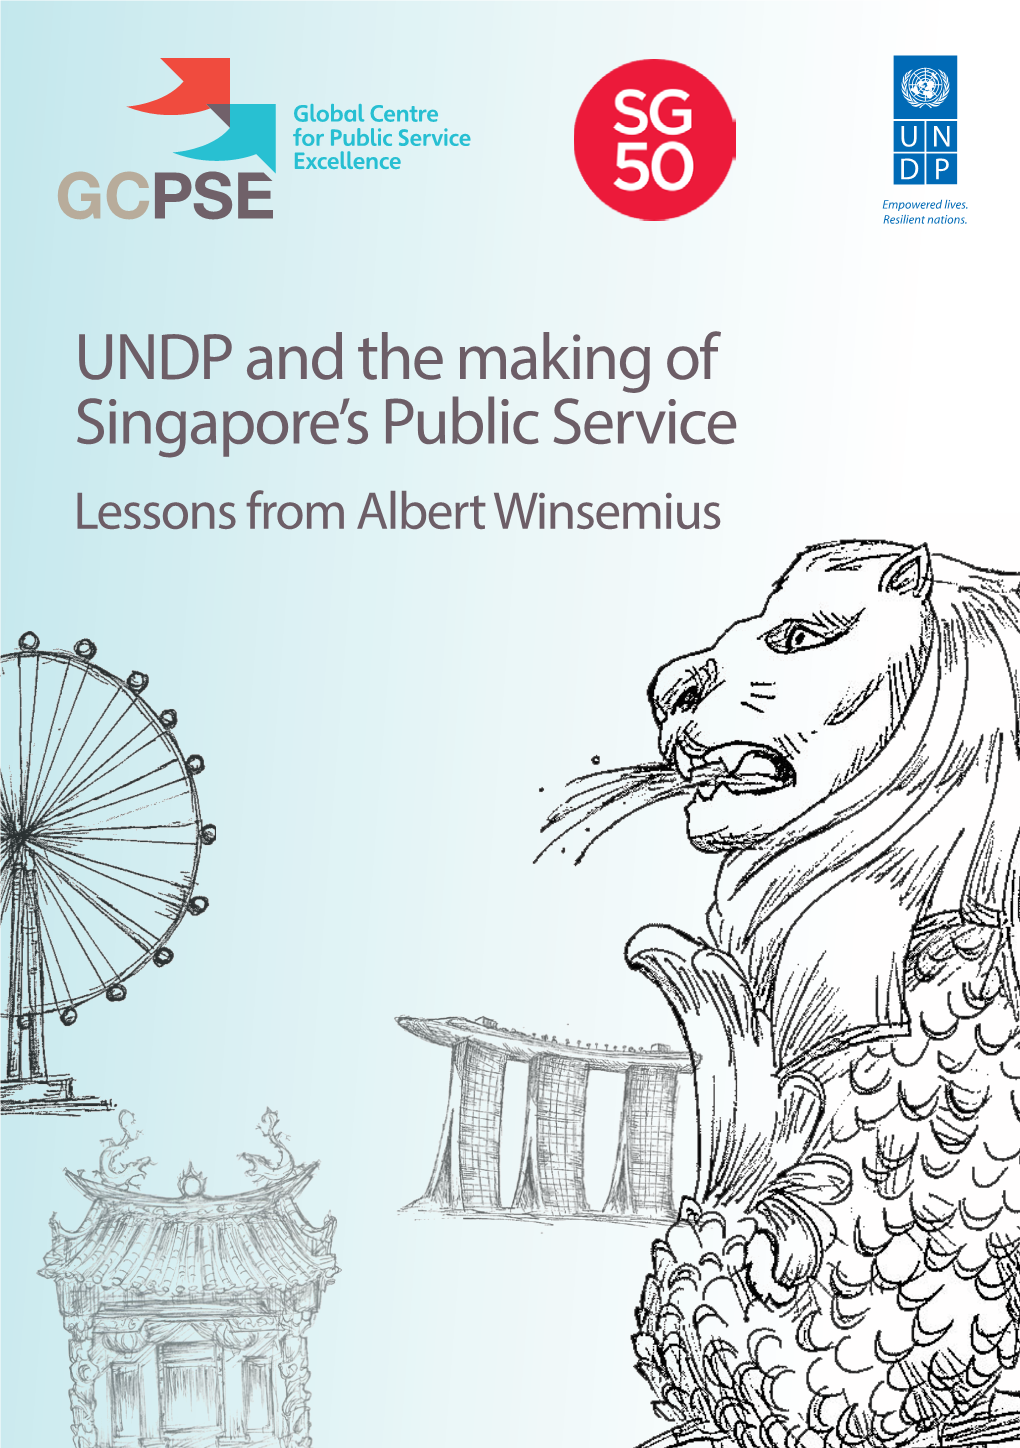 UNDP and the Making of Singapore's Public Service